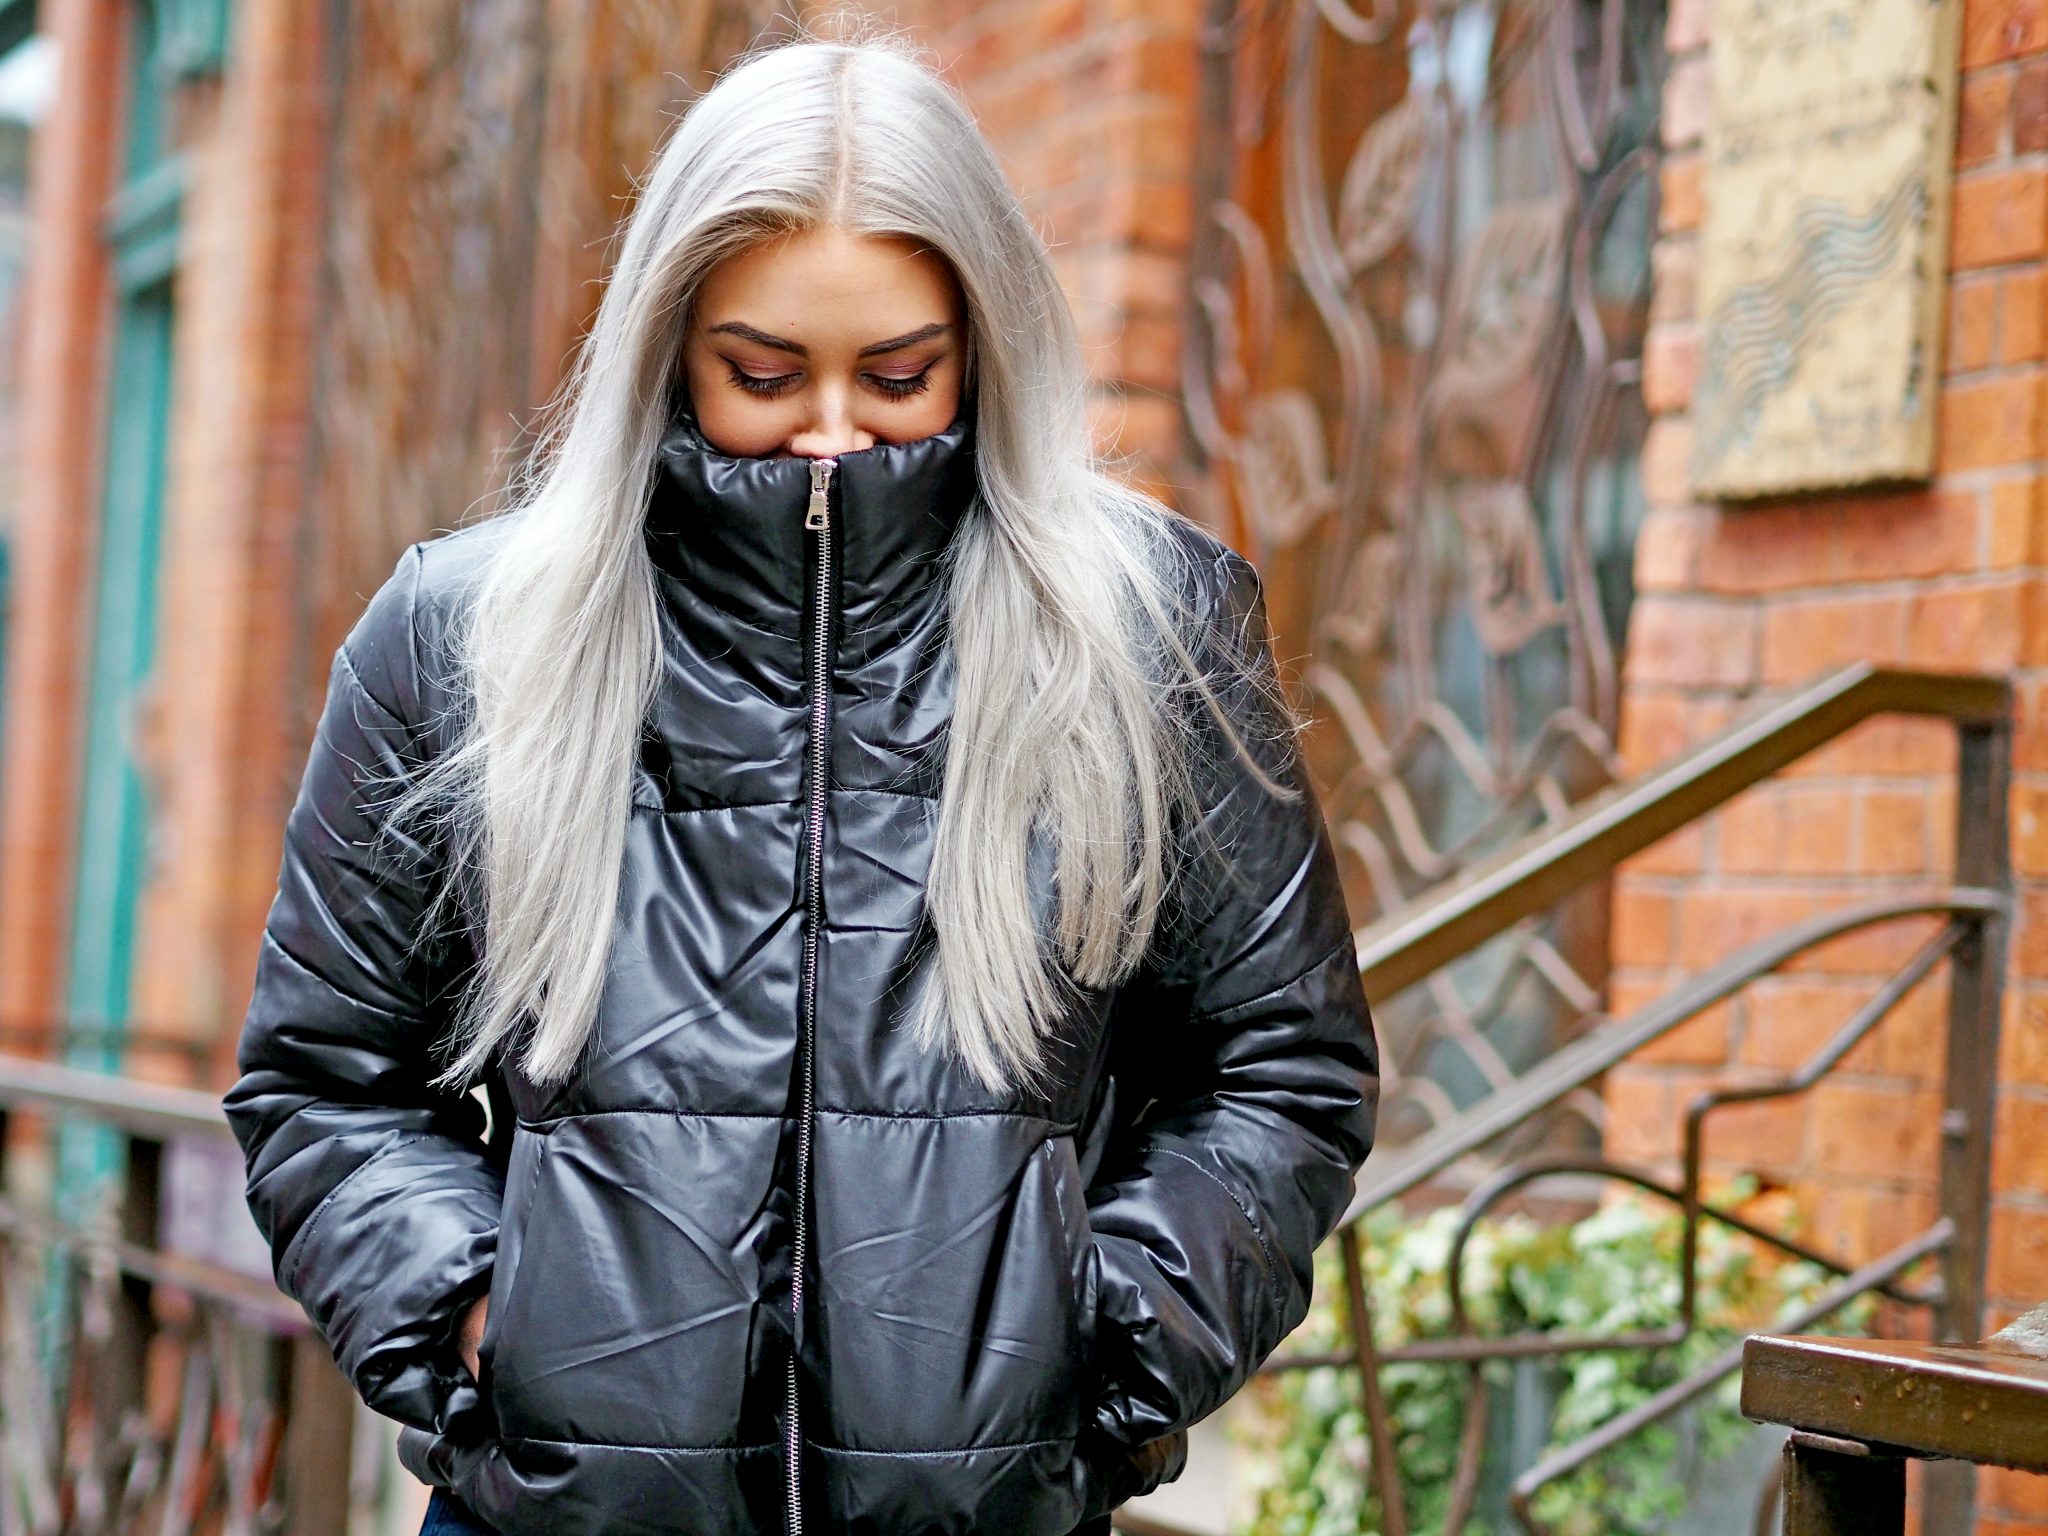 Laura Kate Lucas - Manchester Fashion, Lifestyle and Beauty Blogger | Lasula Outfit - Bad Girls Club Tee, Boots and Cropped Puffer Jacket